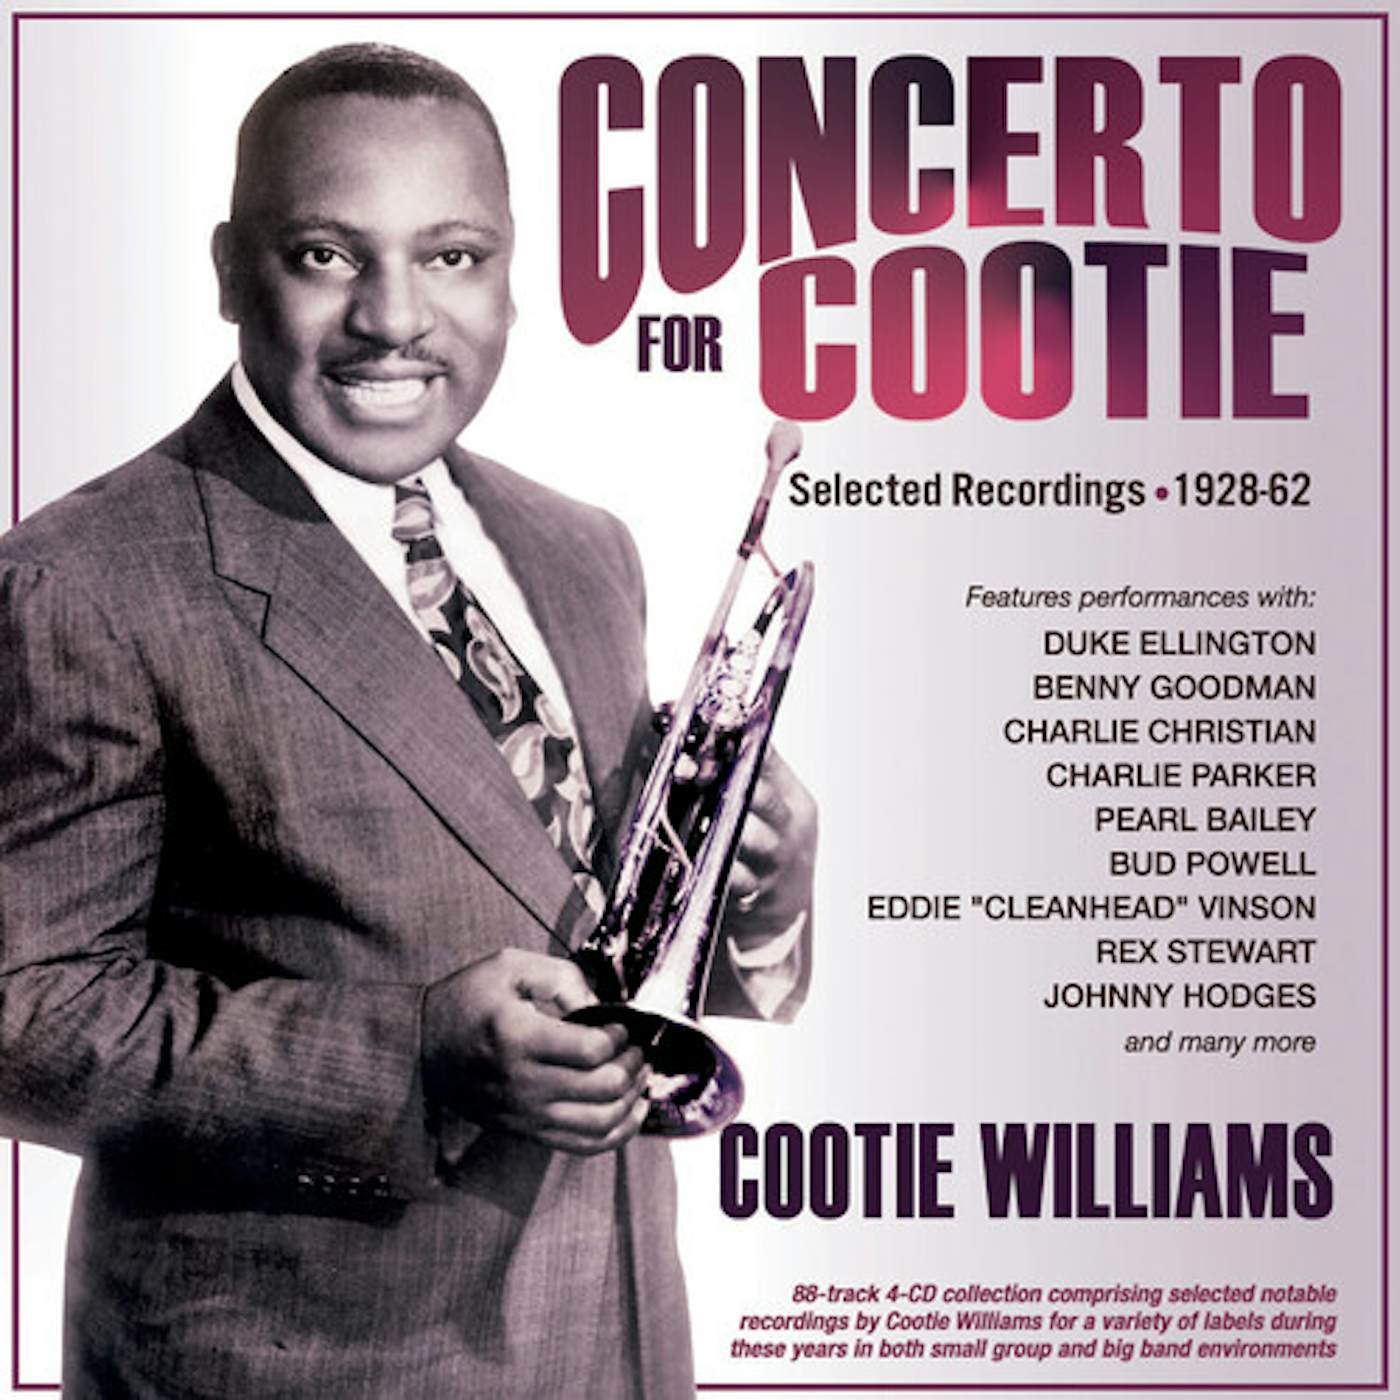 Cootie Williams CONCERTO FOR COOTIE: SELECTED RECORDINGS 1928-62 CD